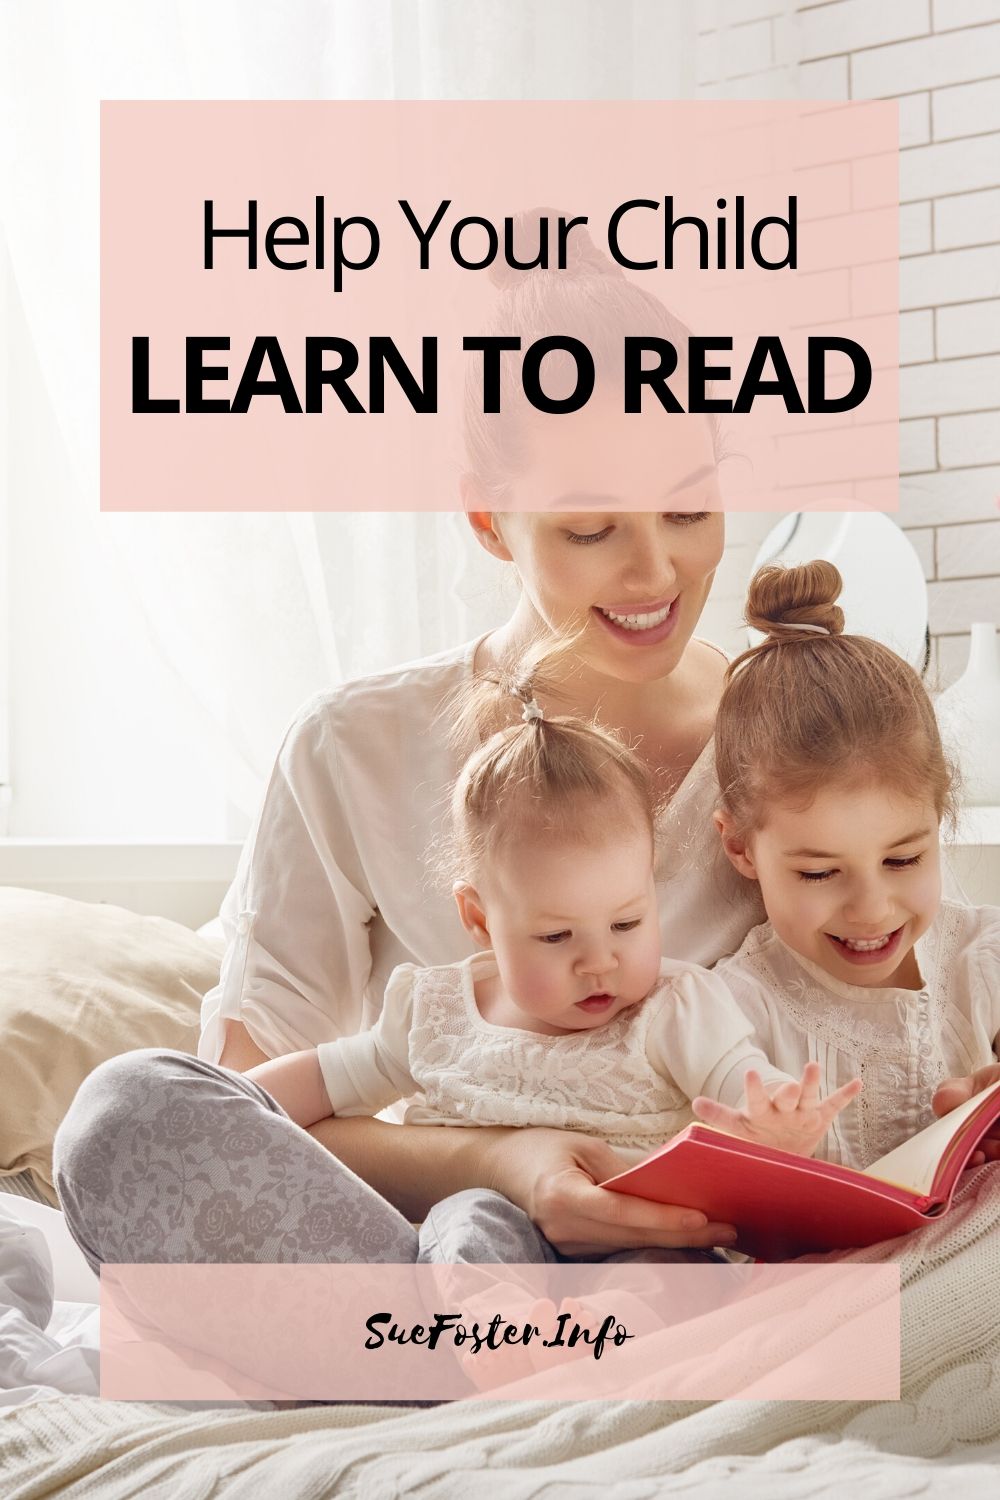 It's important to help your child learn to read. It helps your child succeed in school, helps them build self-confidence, and helps to motivate your child.